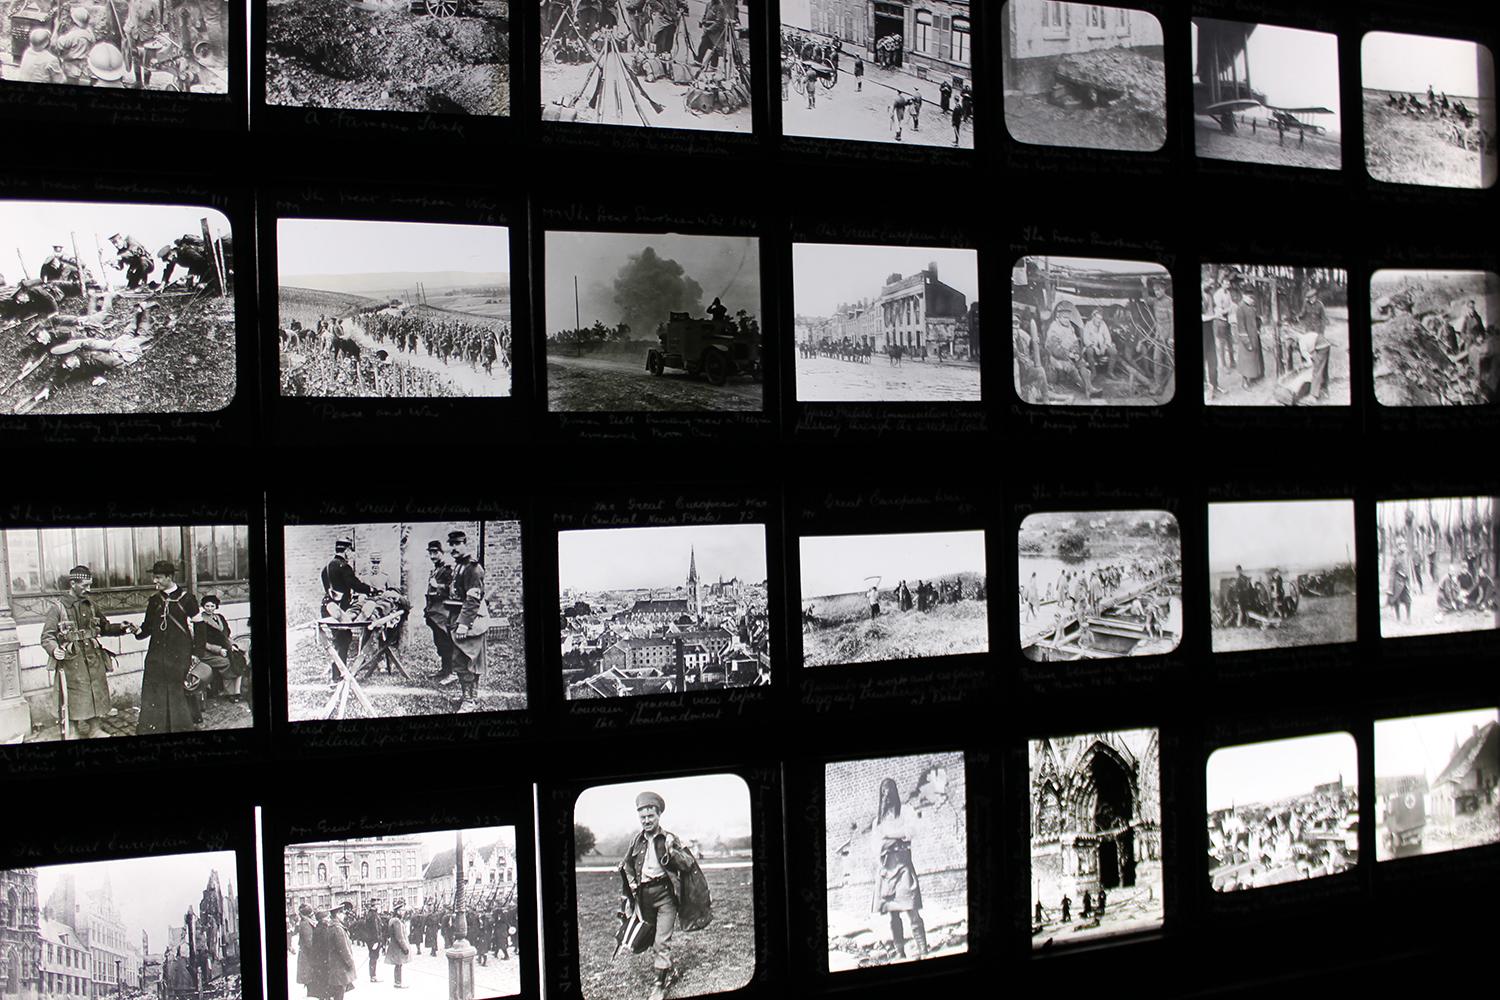 The group of forty-nine rare early 20th century hand-tinted glass magic lantern slides of WWI interest, showing related depictions of ‘The Great European War’ to include soldiers, trenches, aircraft and other related views, with each slide hand